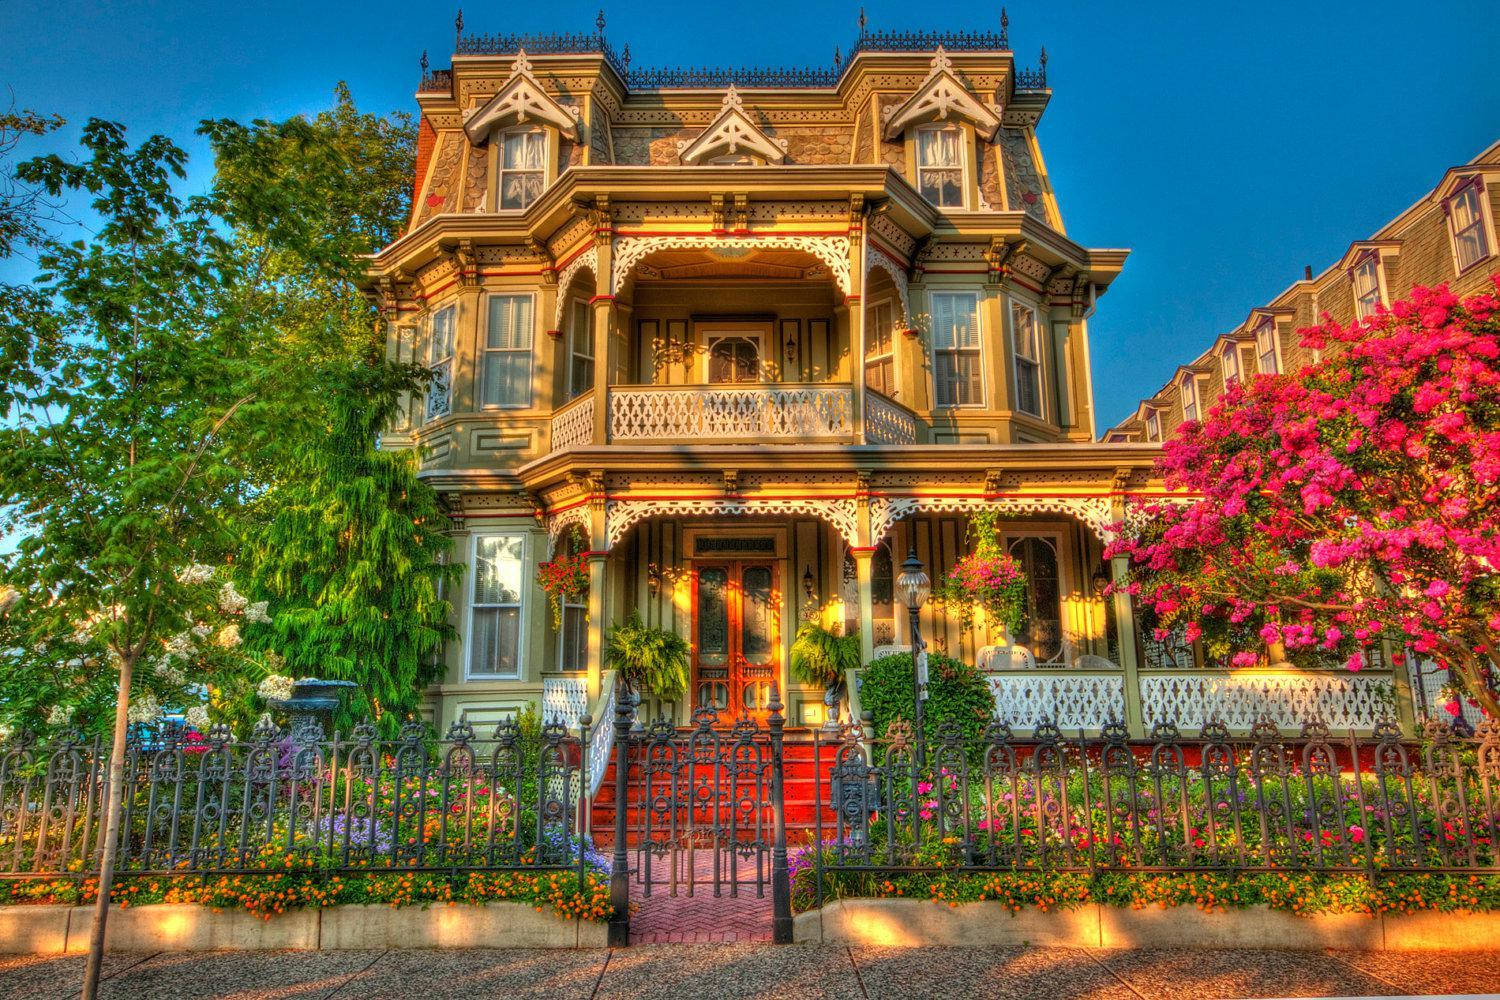 Cape May Victorian House Wallpaper